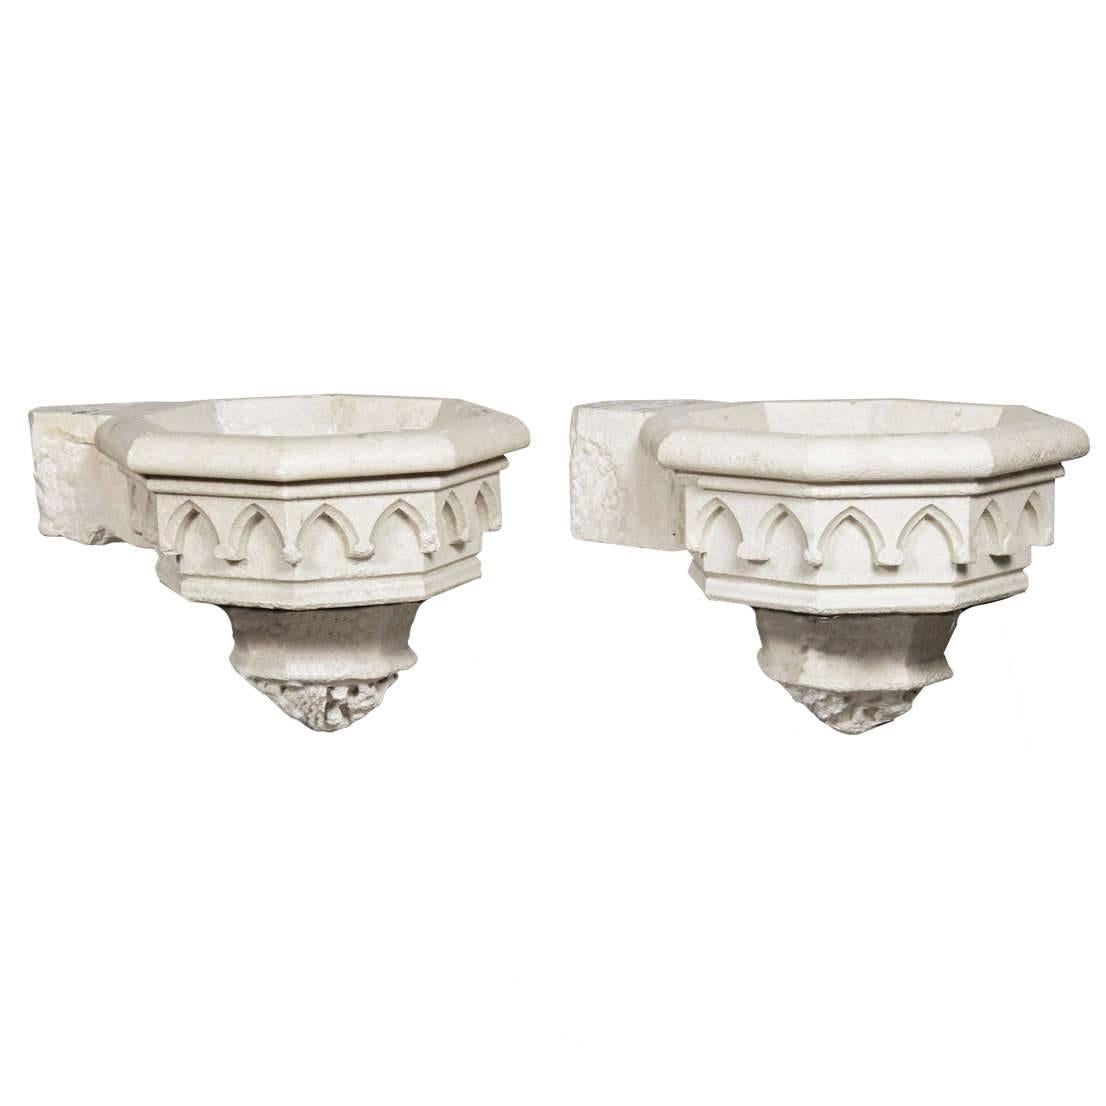 Pair of Antique Carved Stone Sinks (Stoups or Benitiers) from France, Circa 1830 For Sale